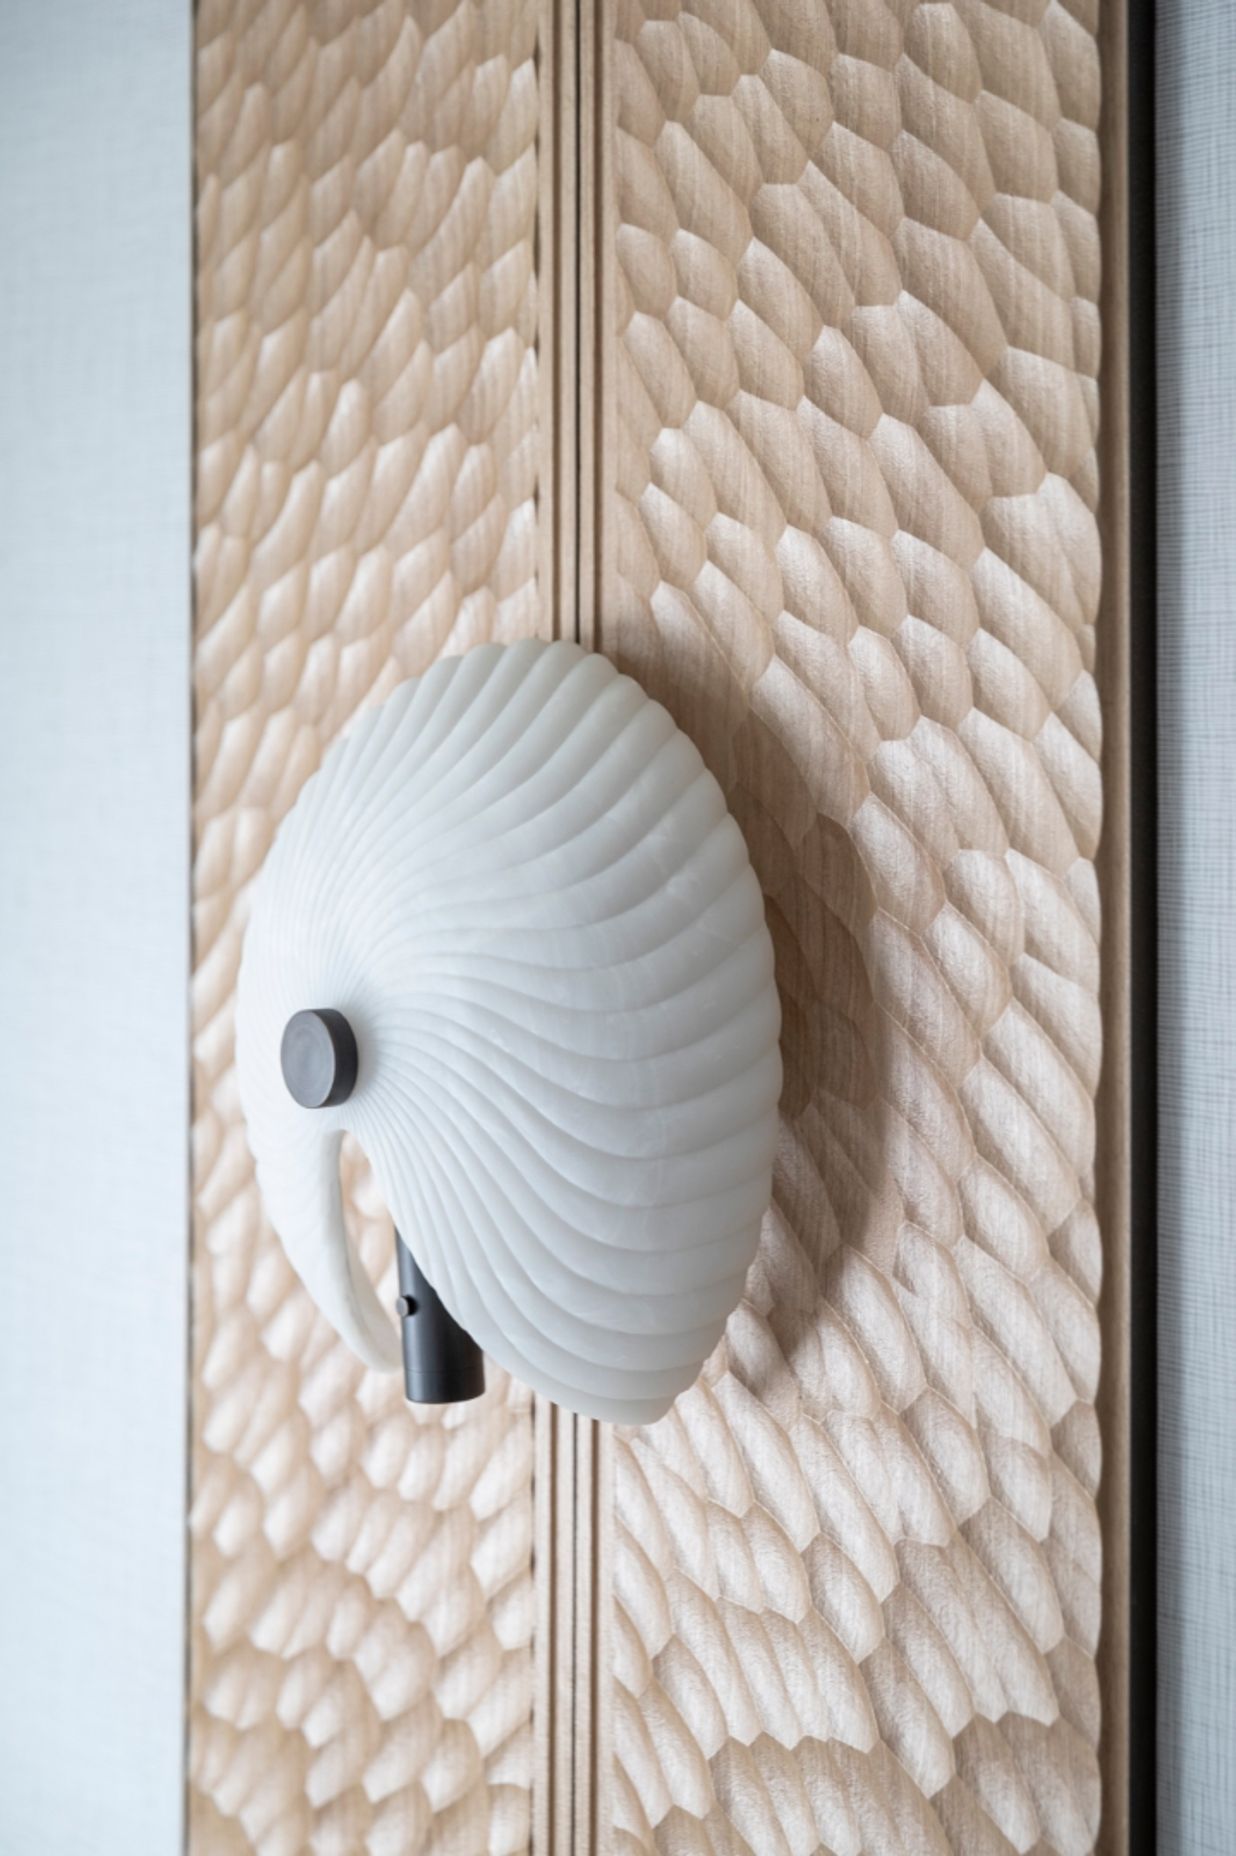 Working closely with Ngāti Whātua Ōrākei, Space Studio developed a story around the “paper nautilus” – an octopus that makes a parchment-like shell to carry incubating eggs into shore.